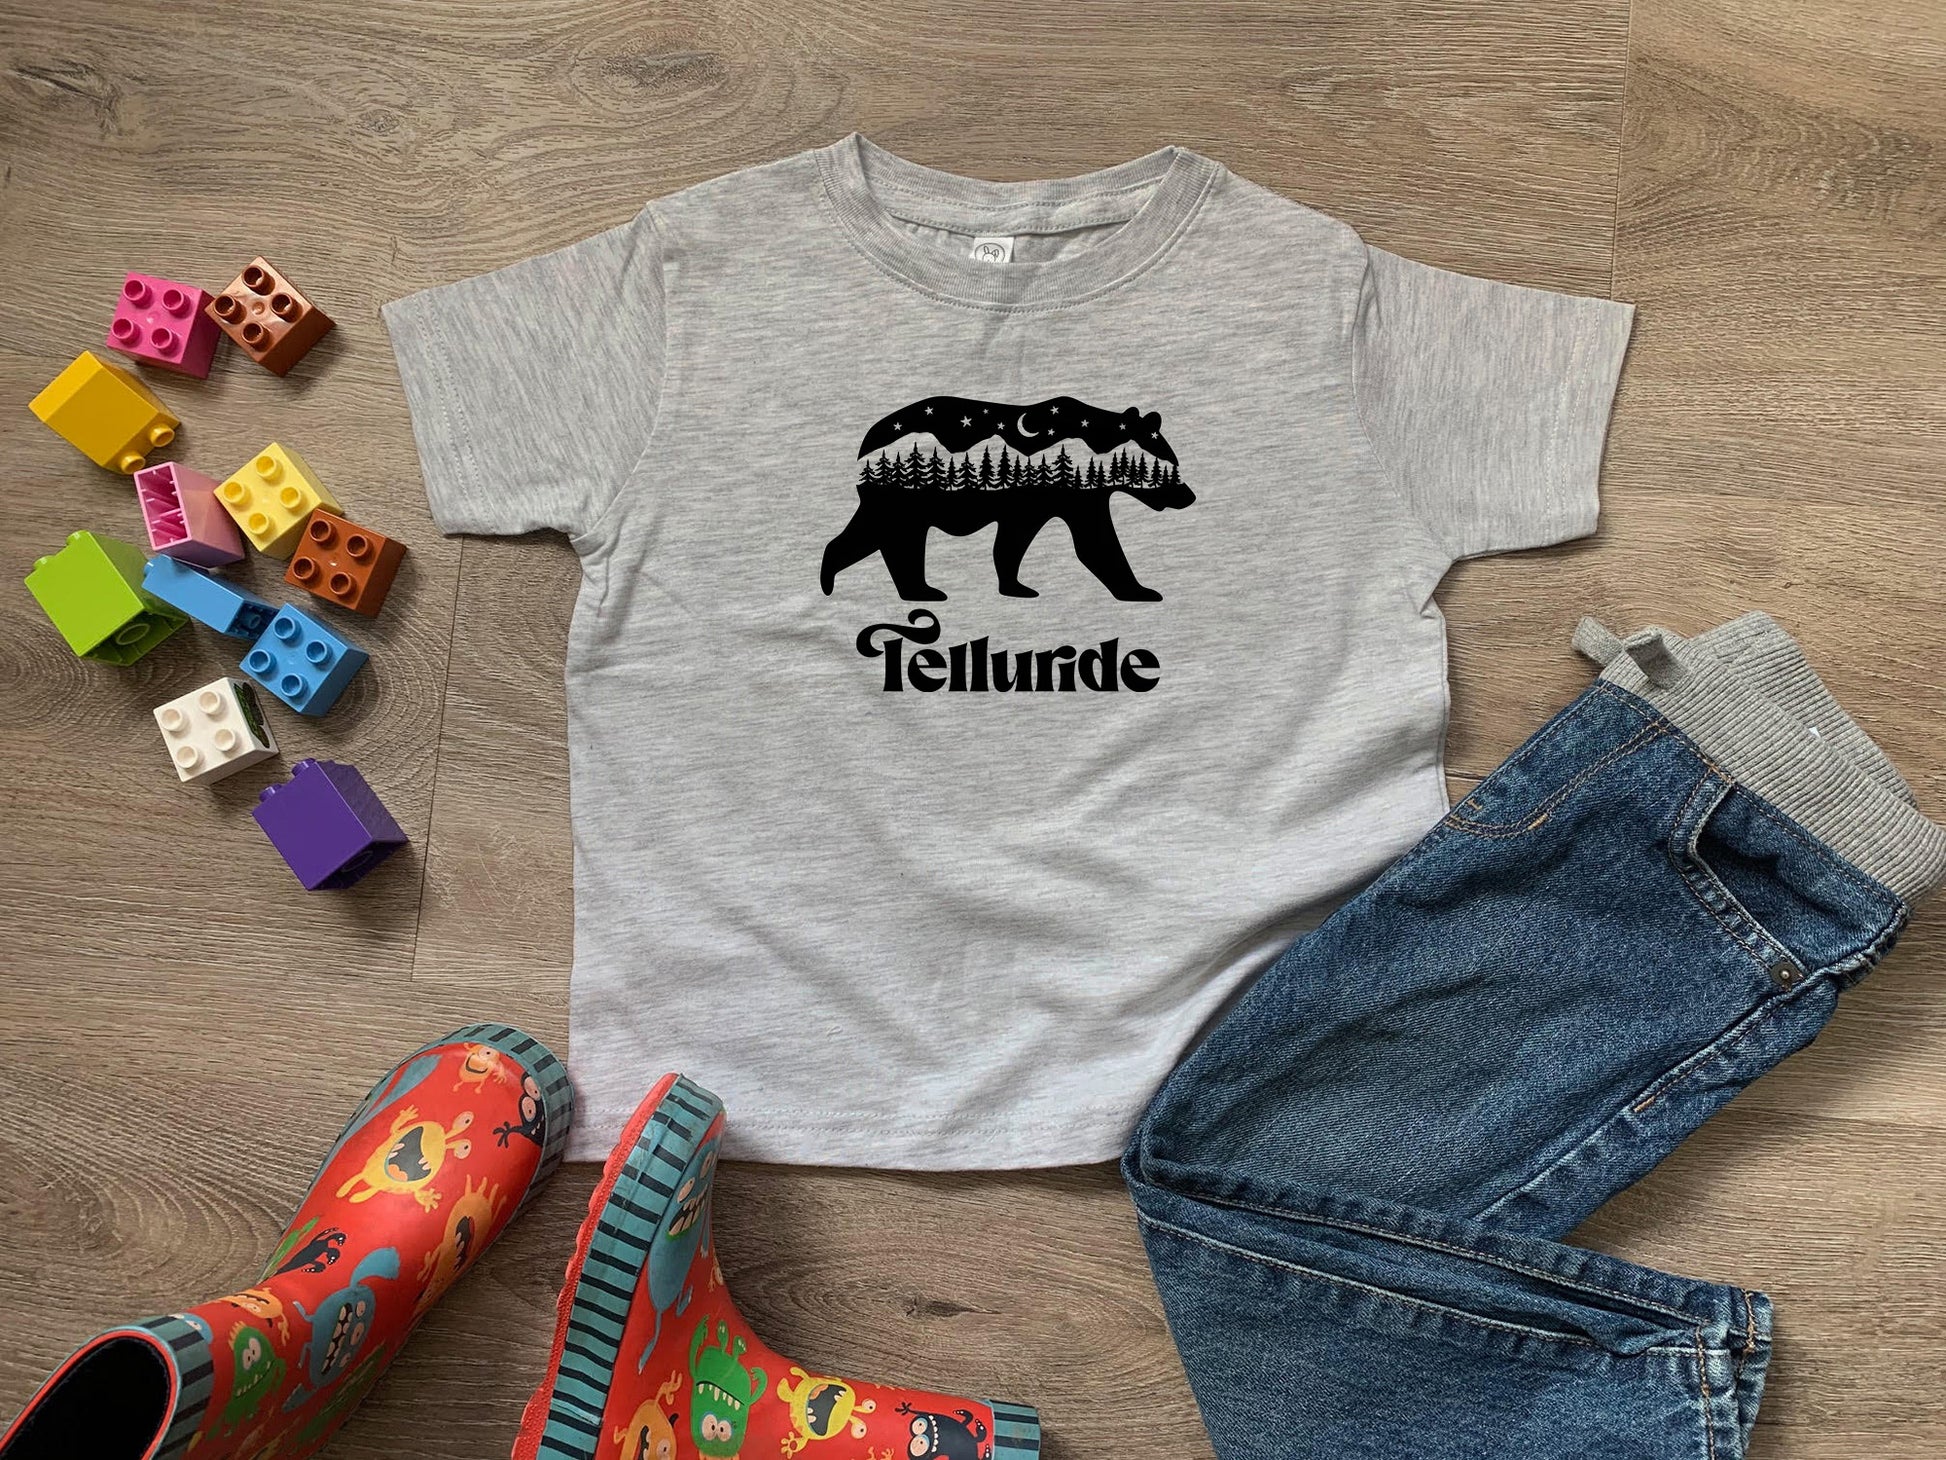 a t - shirt with a bear on it next to a pair of jeans and